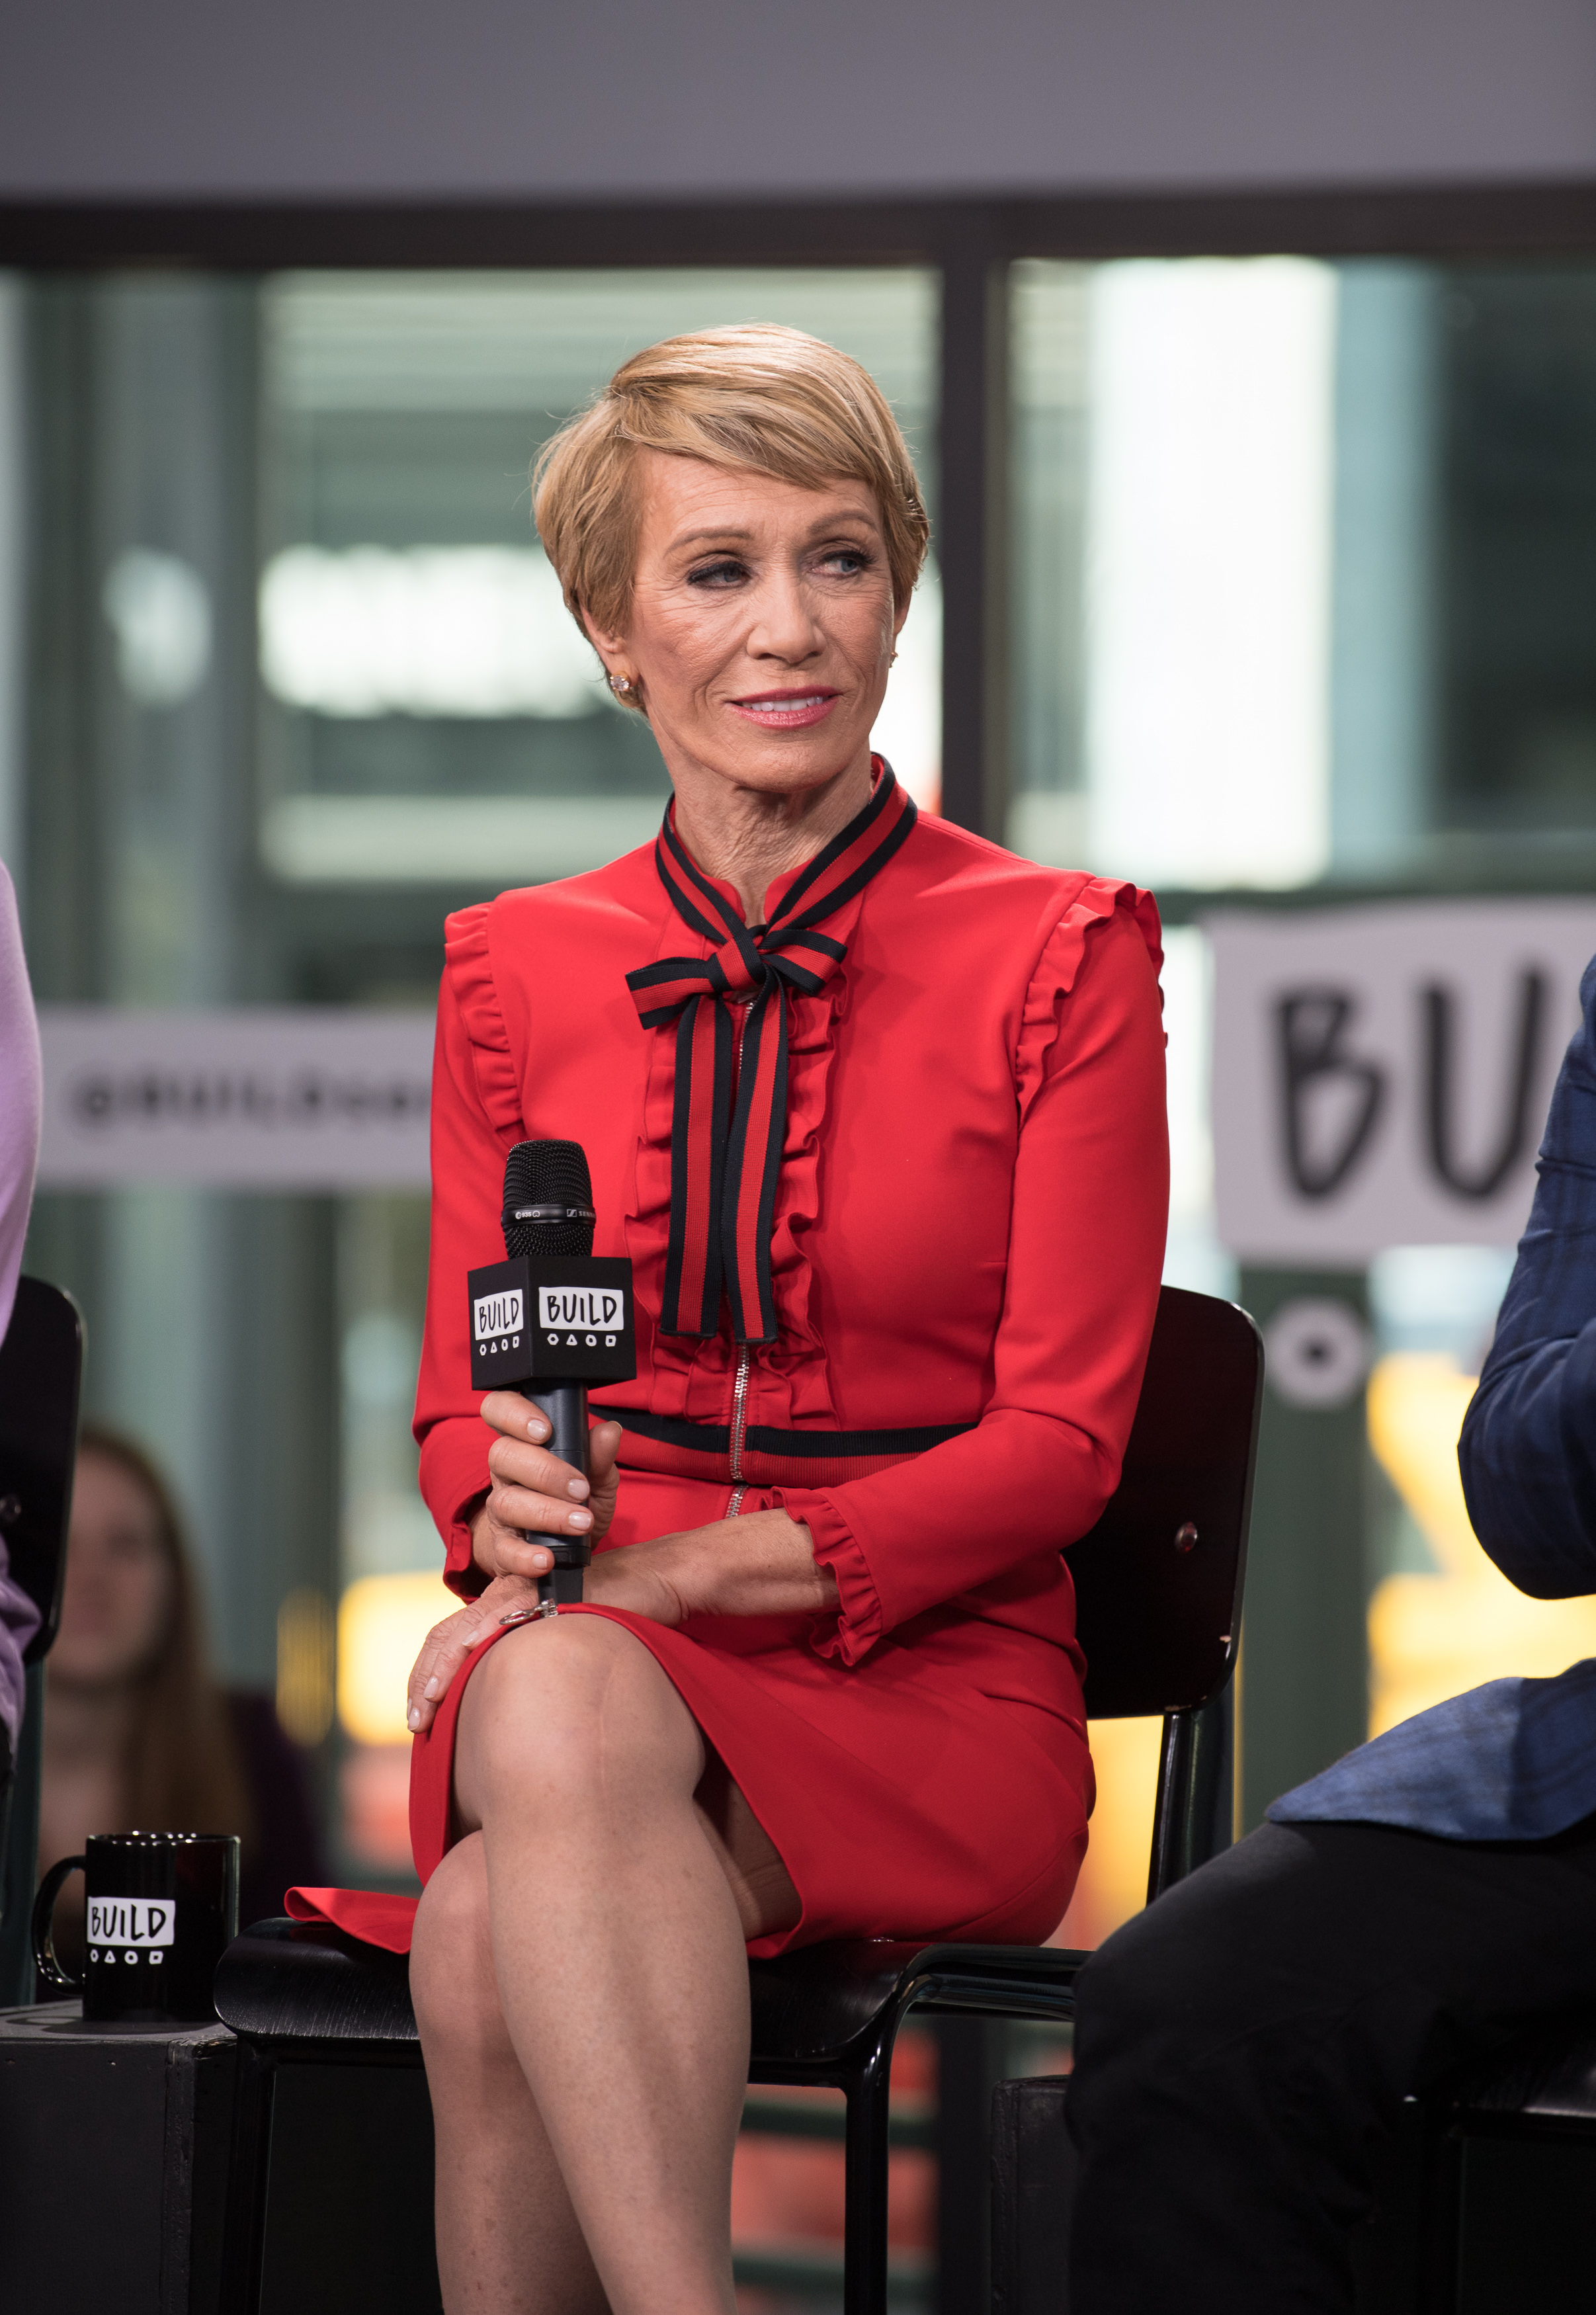 Barbara Corcoran discusses "Shark Tank" at Build Studio on February 8, 2017 in New York City | Source: Getty Images